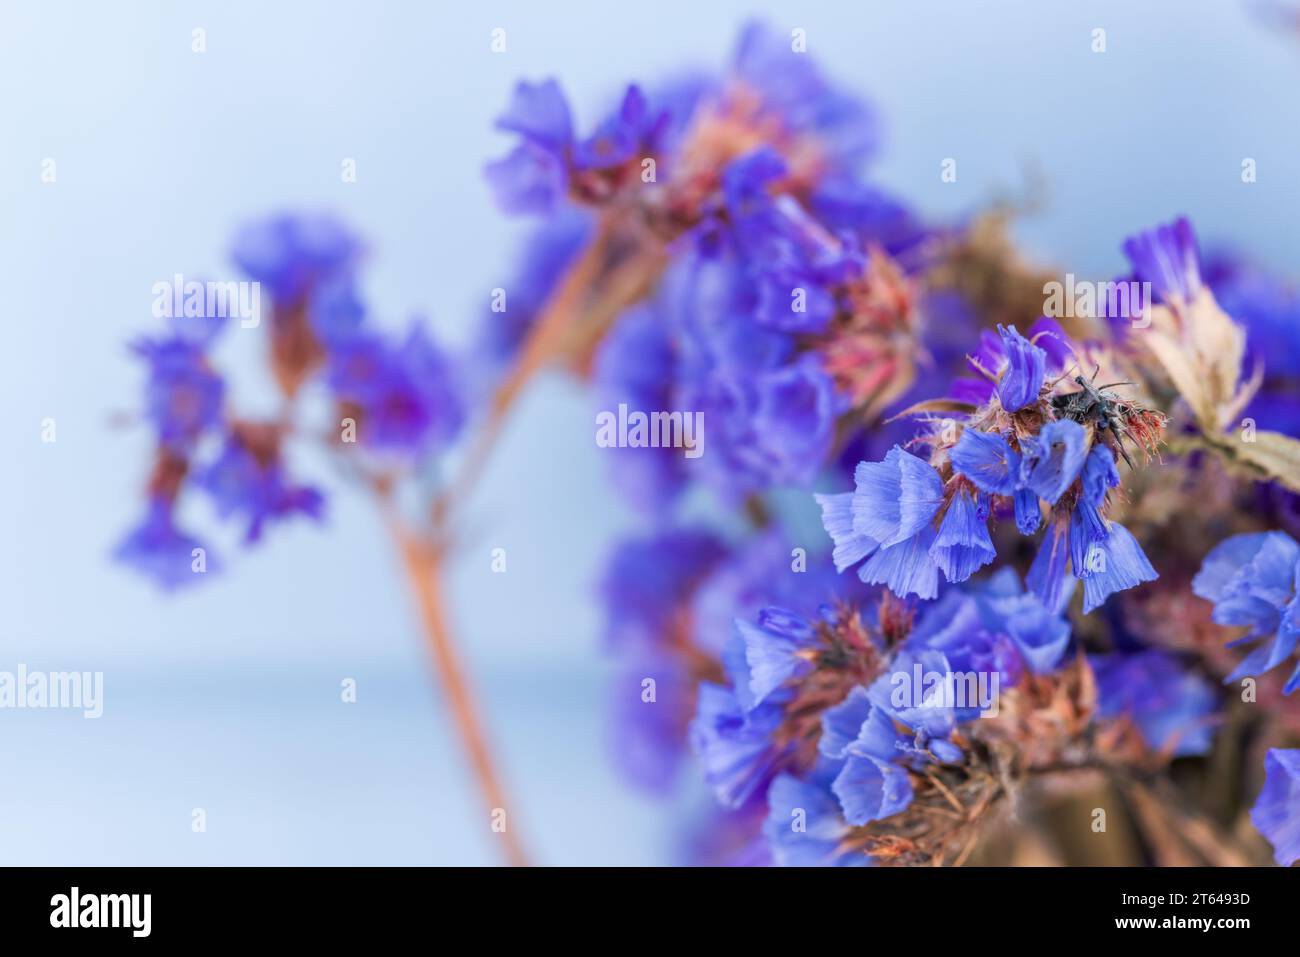 Dry blue flowers macro photo with selective soft focus. Limonium sinuatum commonly known as wavyleaf sea lavender, statice, sea lavender, notch leaf m Stock Photo